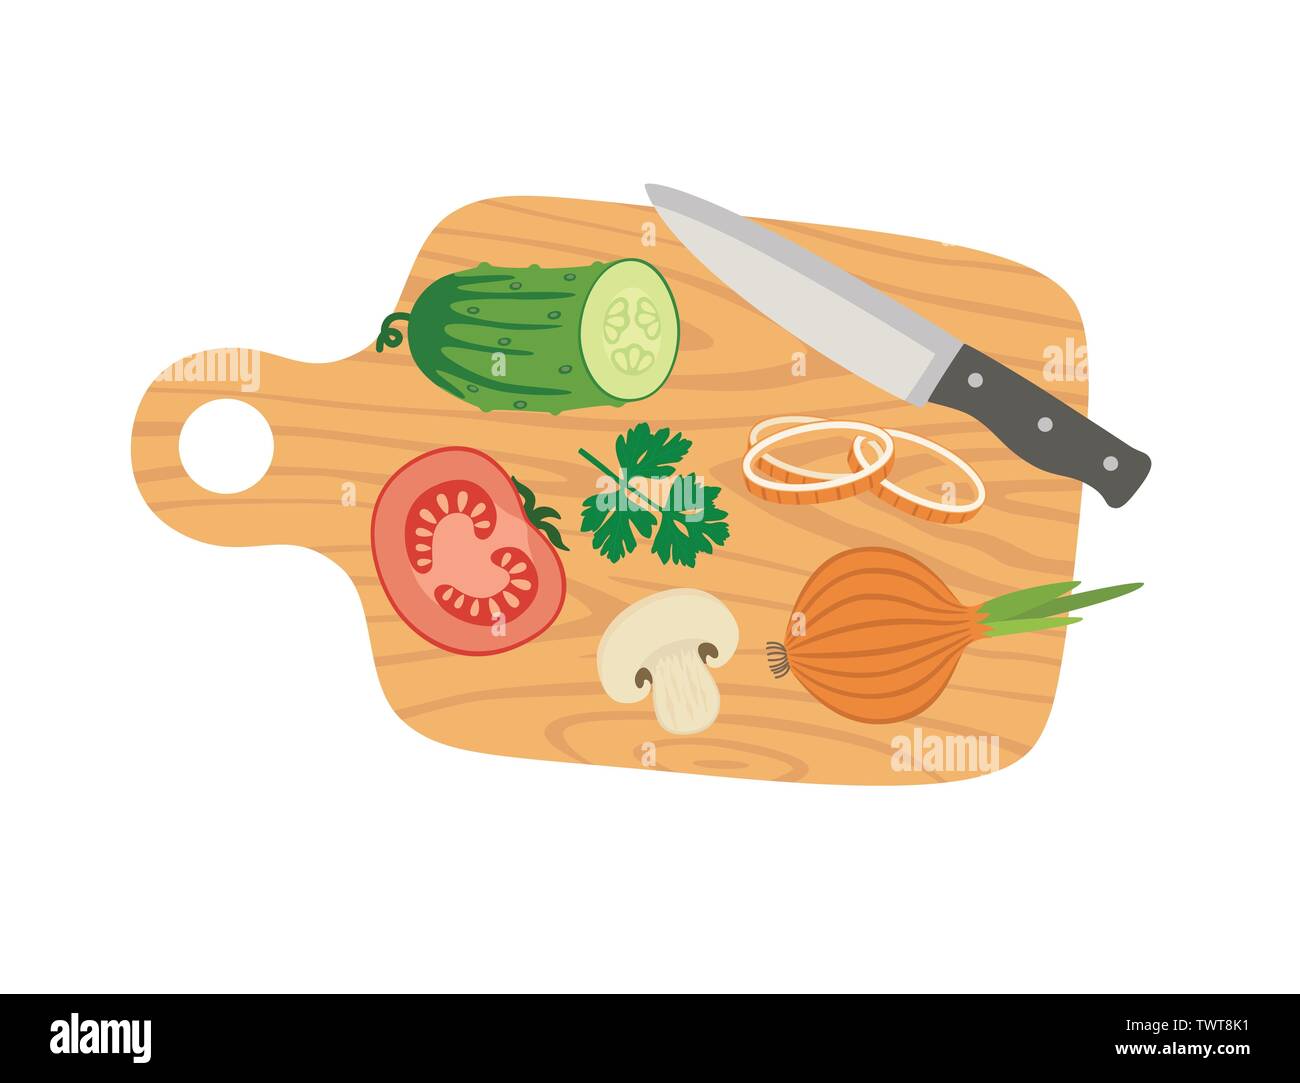 Cutting board and vegetables Cooking card poster with tomato, cucumber, onion, mushrooms, parsley and knife. Stock Vector